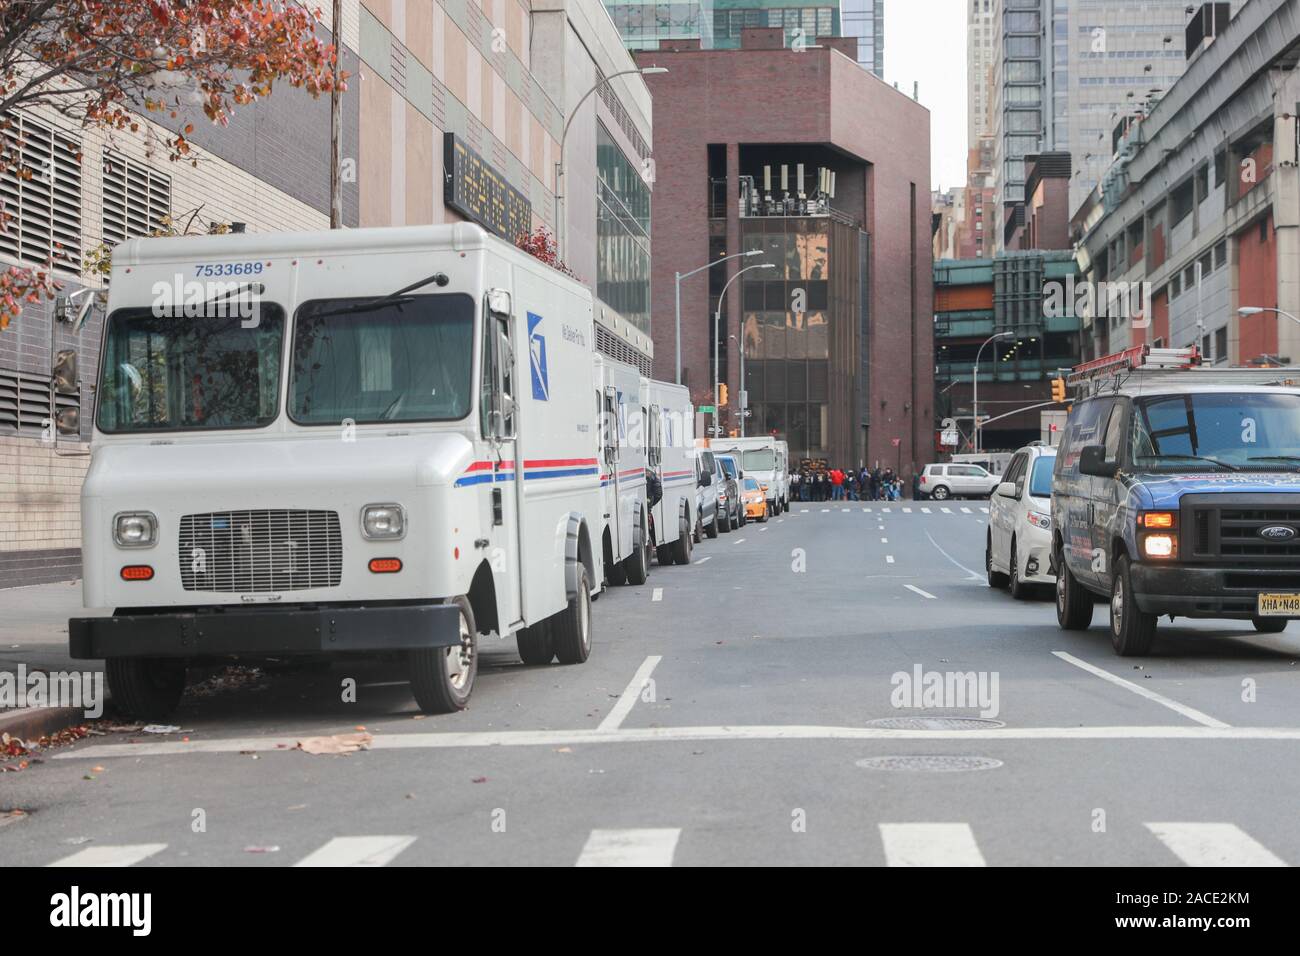 New York November 28 2019: USPS Post Office Mail Trucks in New York. The Post Office is Responsible for Providing Mail Delivery IV - Image Stock Photo